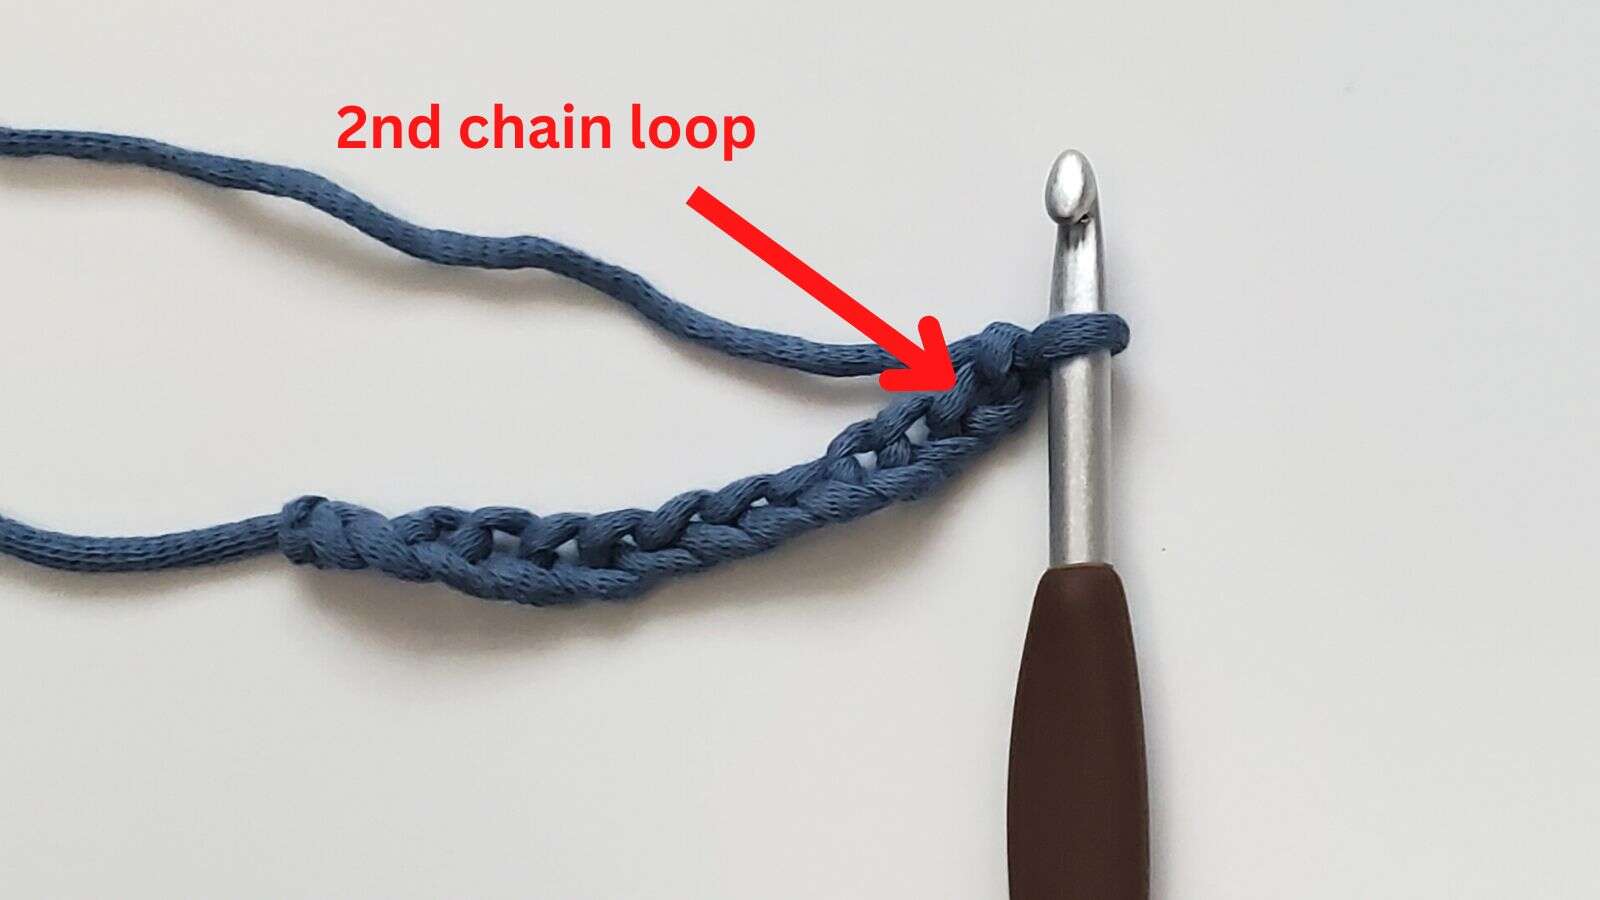 2nd chain loop on foundation chain